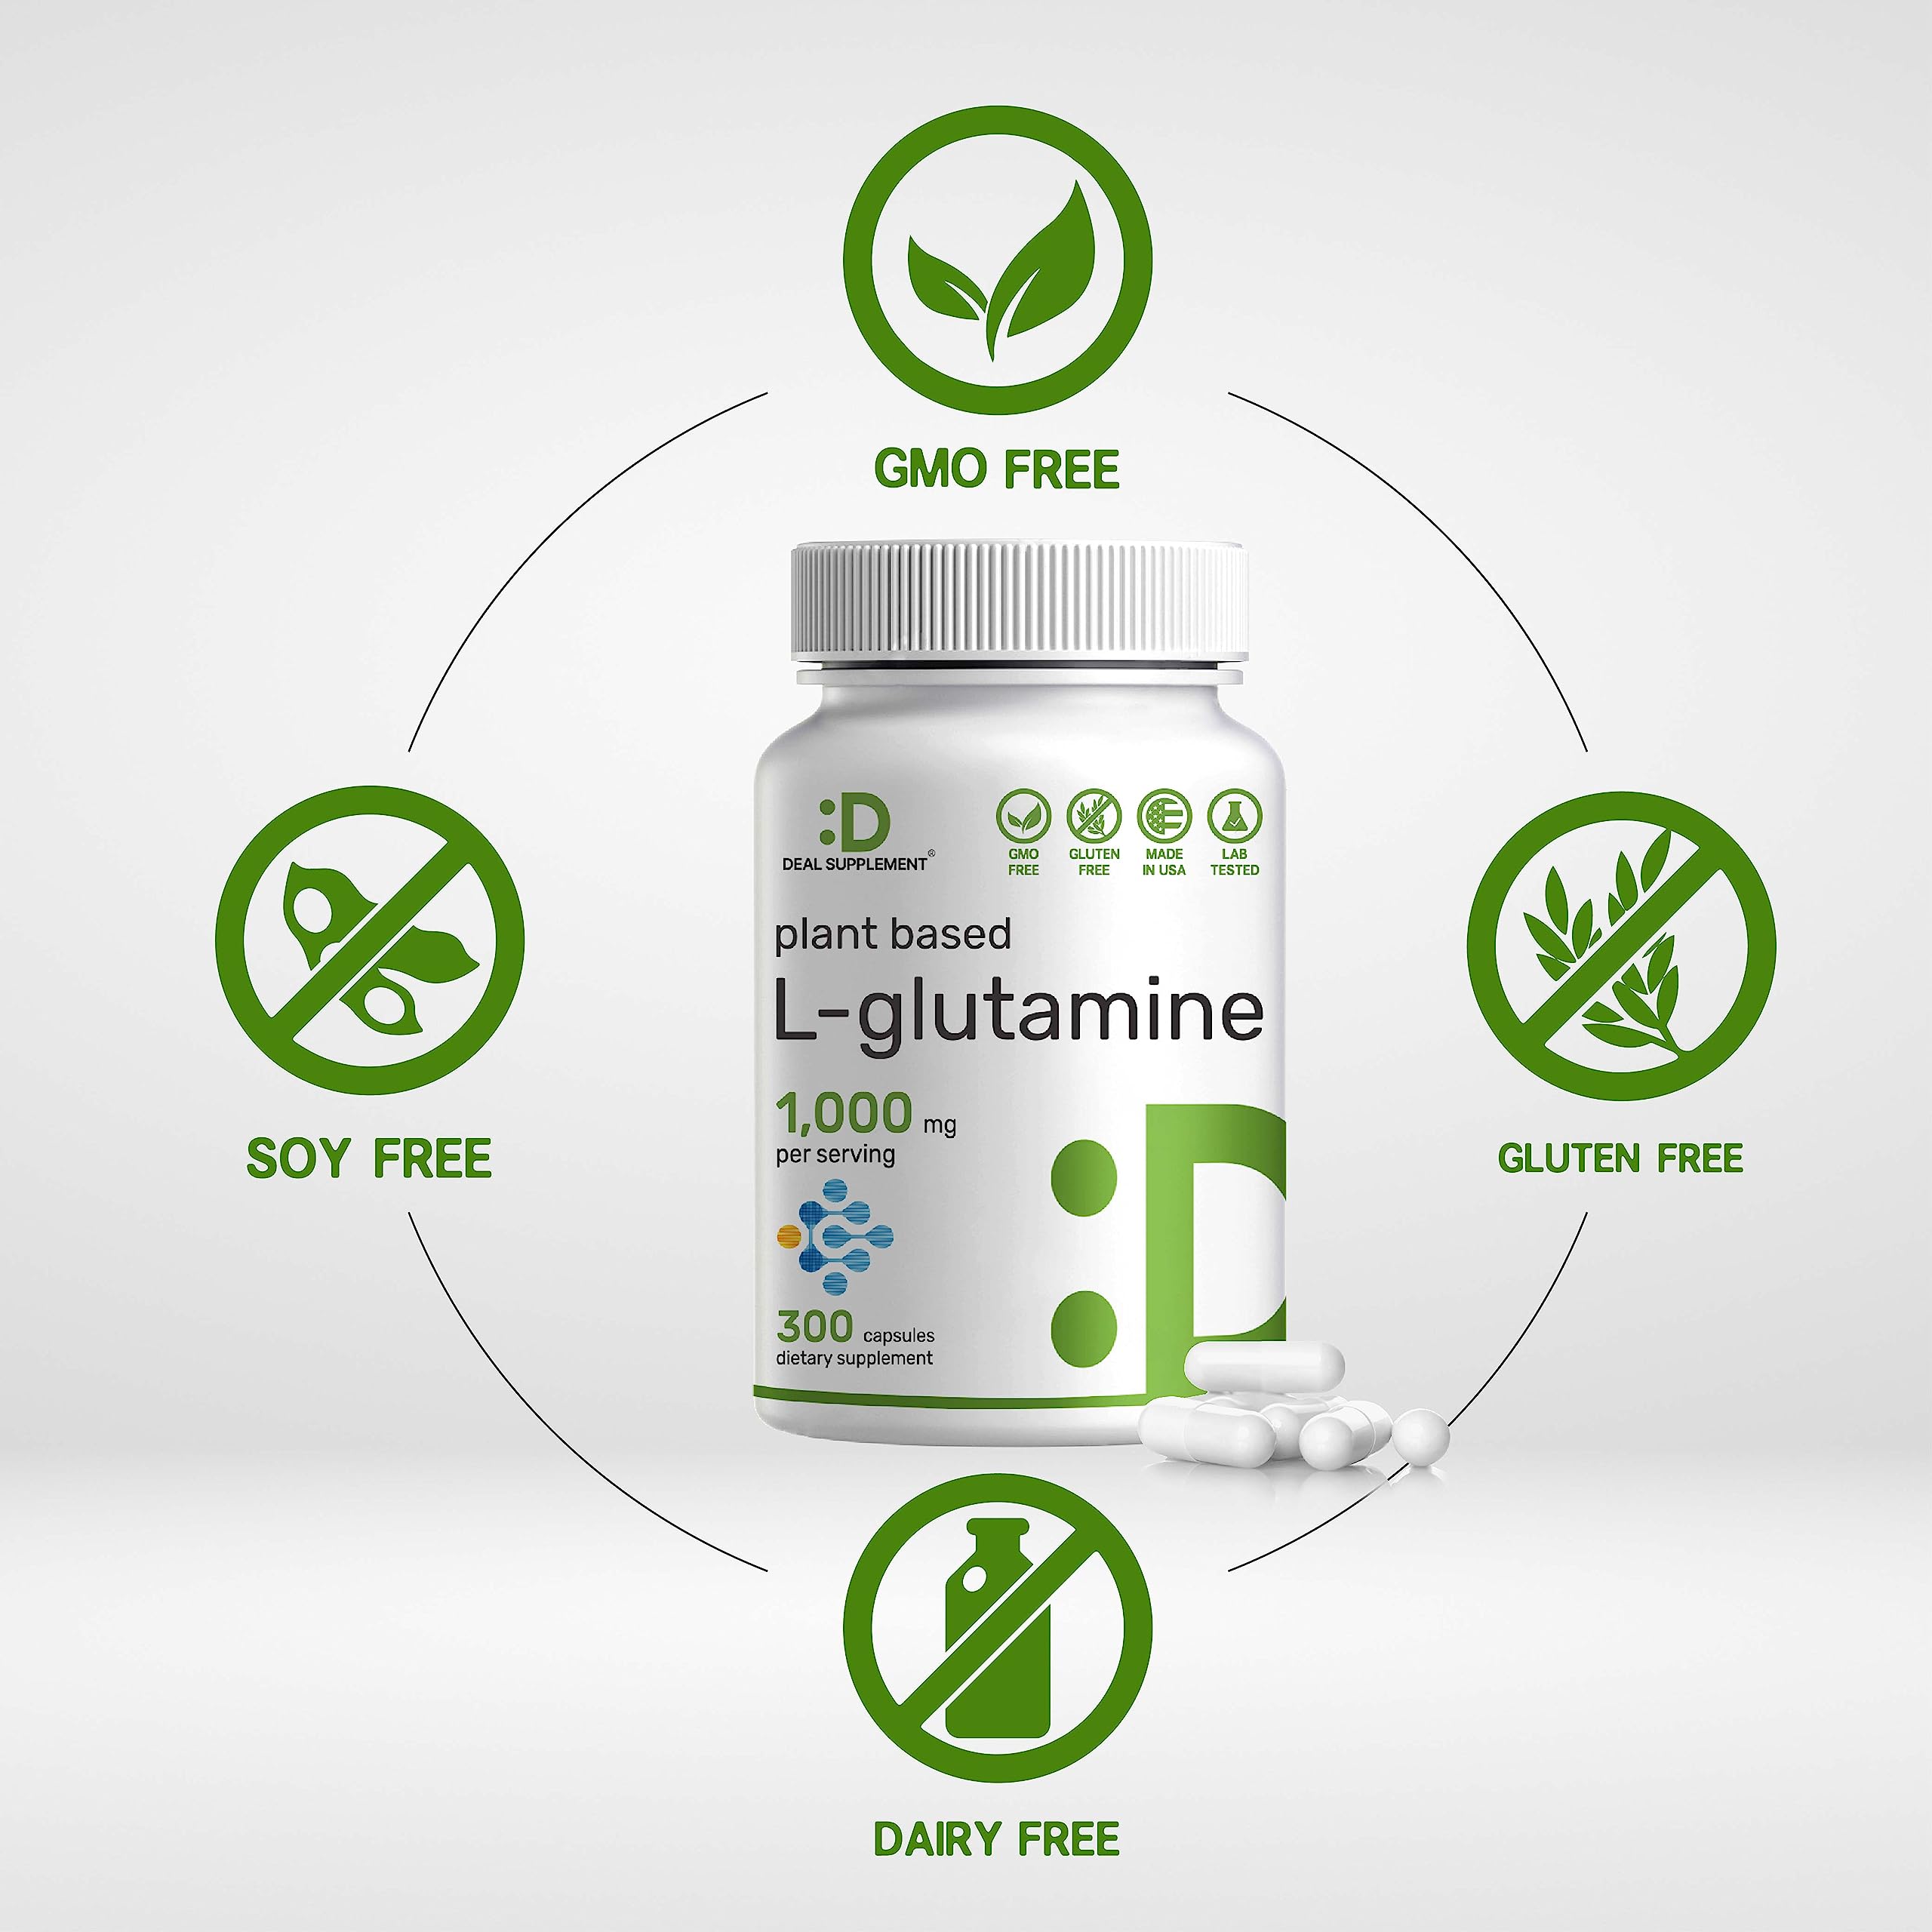 DEAL SUPPLEMENT L-Glutamine 1,000mg, 300 Capsules – Easily Absorbed Free Form, Plant Based Source, Key Amino Acid – Supports Gut Health & Muscle Recovery – Unflavored Pills, Non-GMO